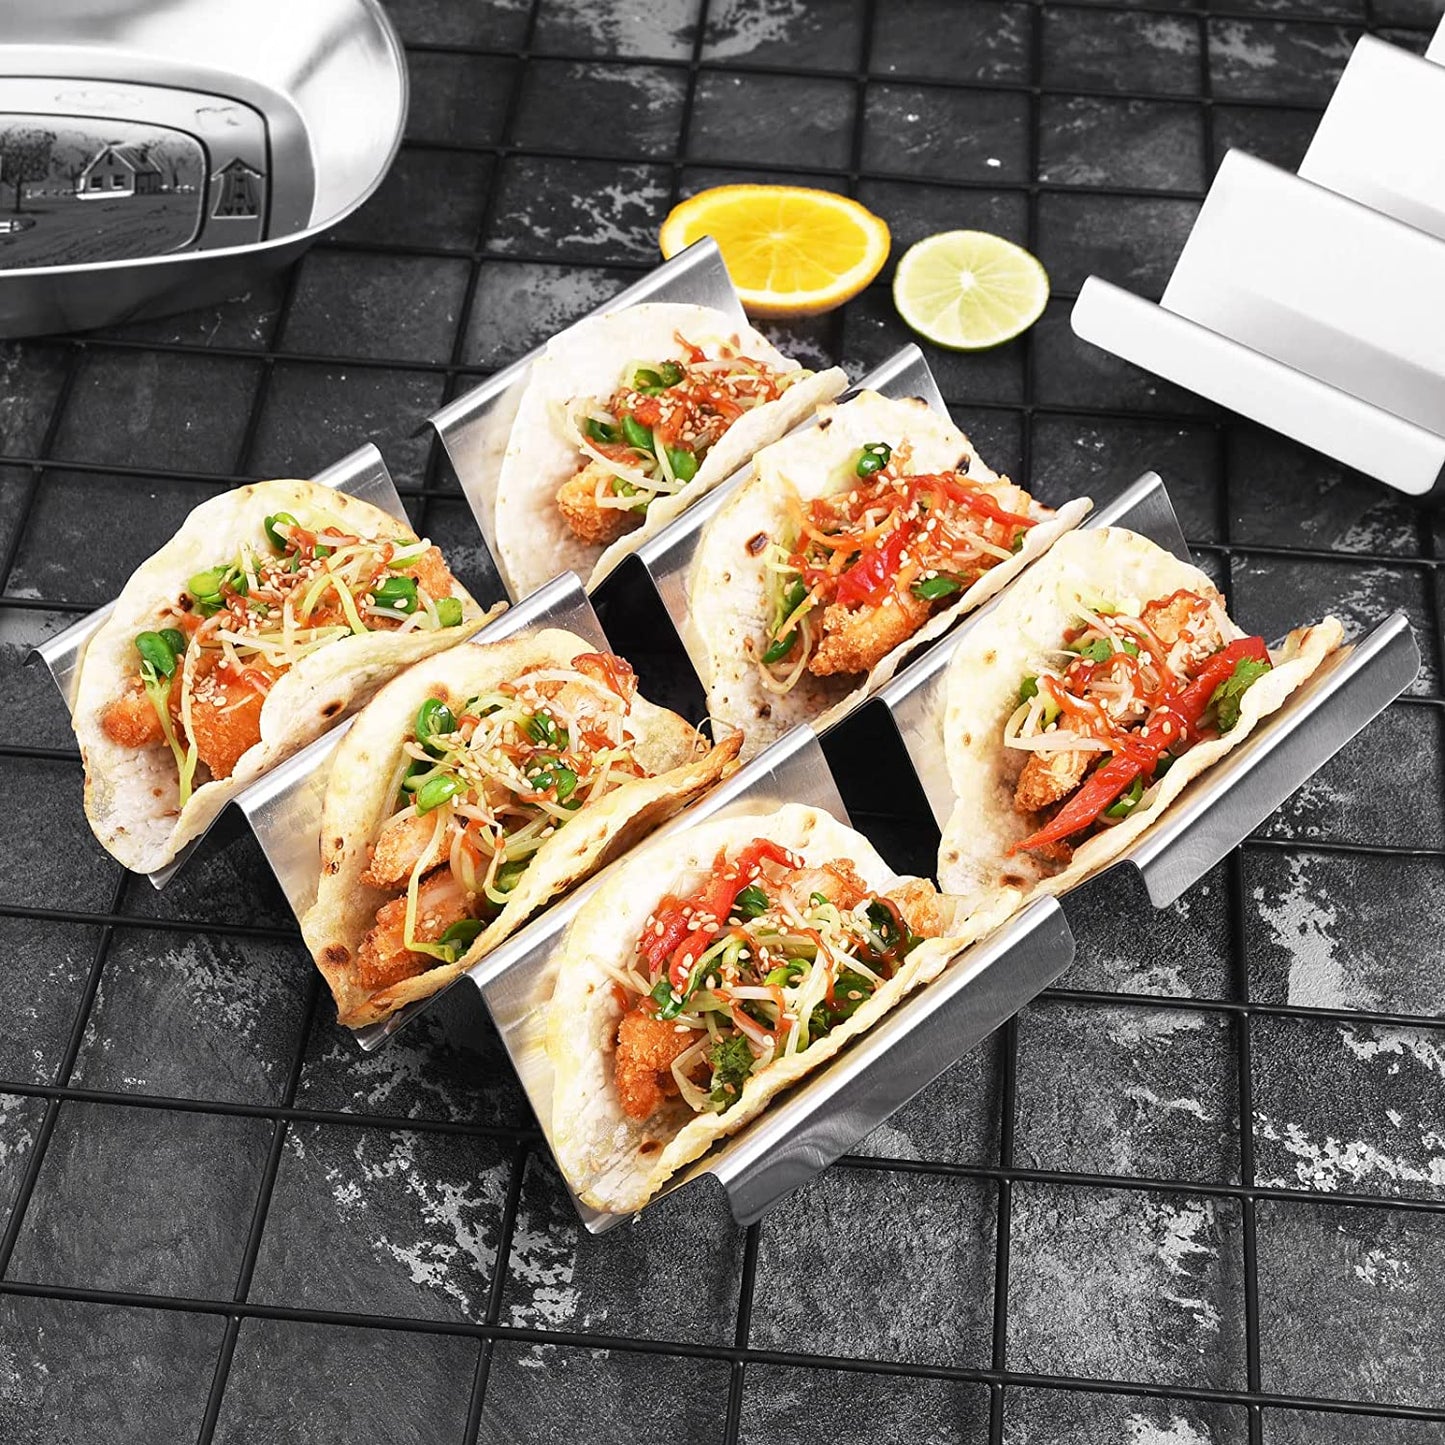 Taco Holders 4 Packs - Stainless Steel Taco Stand Rack Tray Style by ARTTHOME, Oven Safe for Baking, Dishwasher and Grill Safe